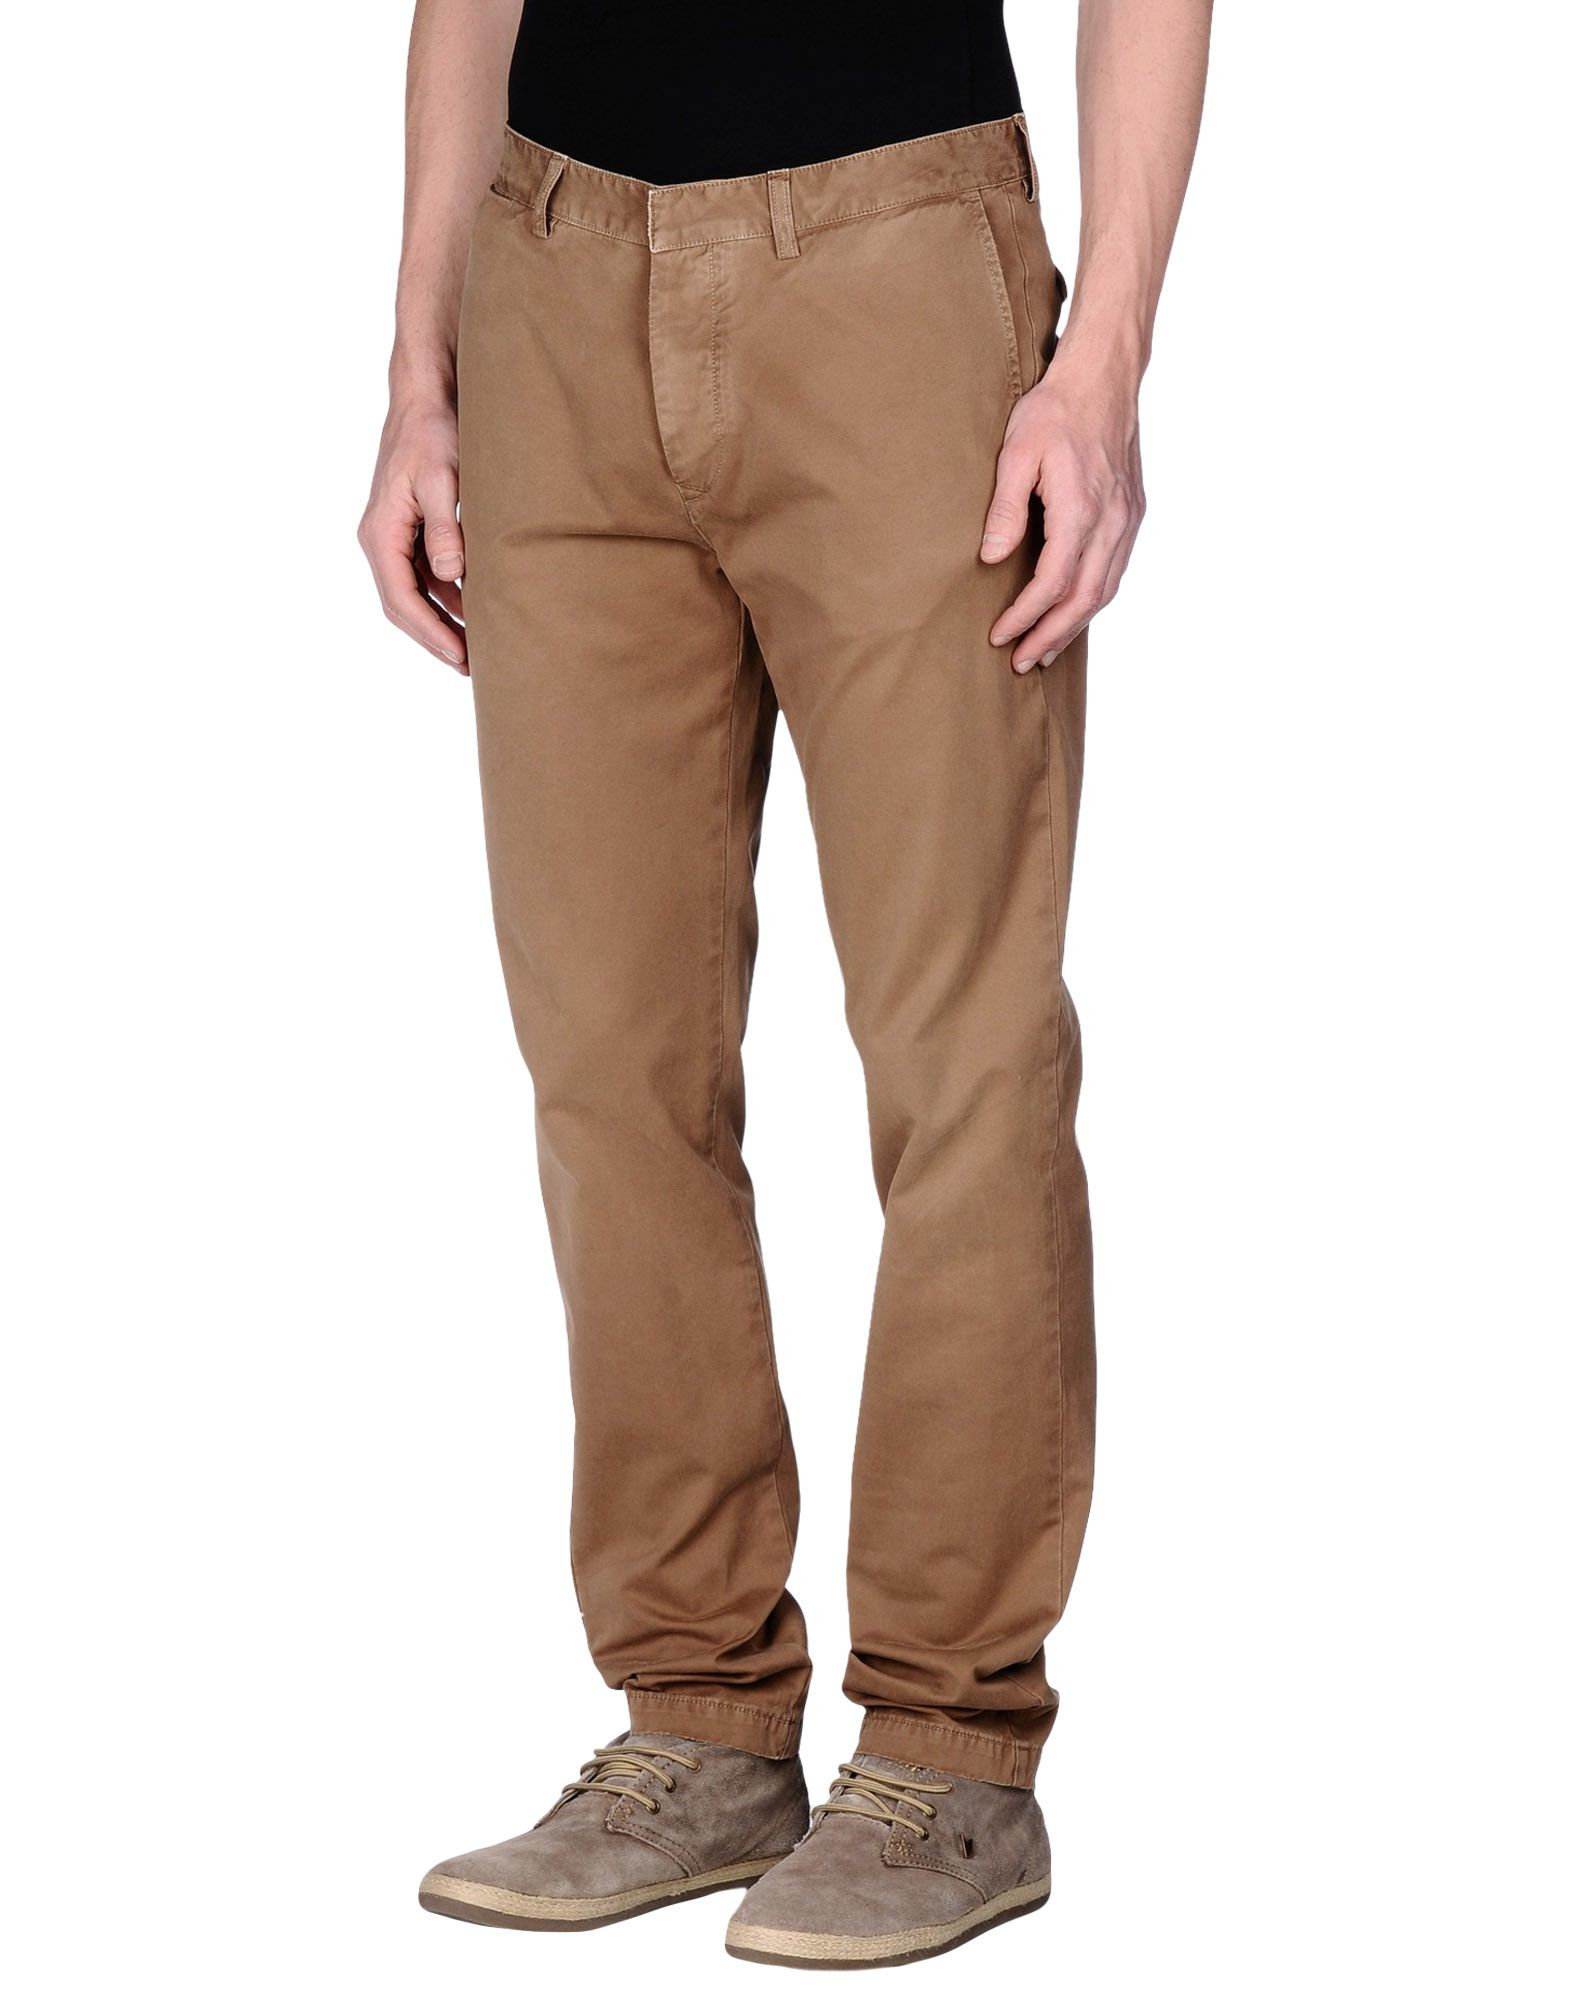 Lyst - Ra-Re Casual Trouser in Natural for Men